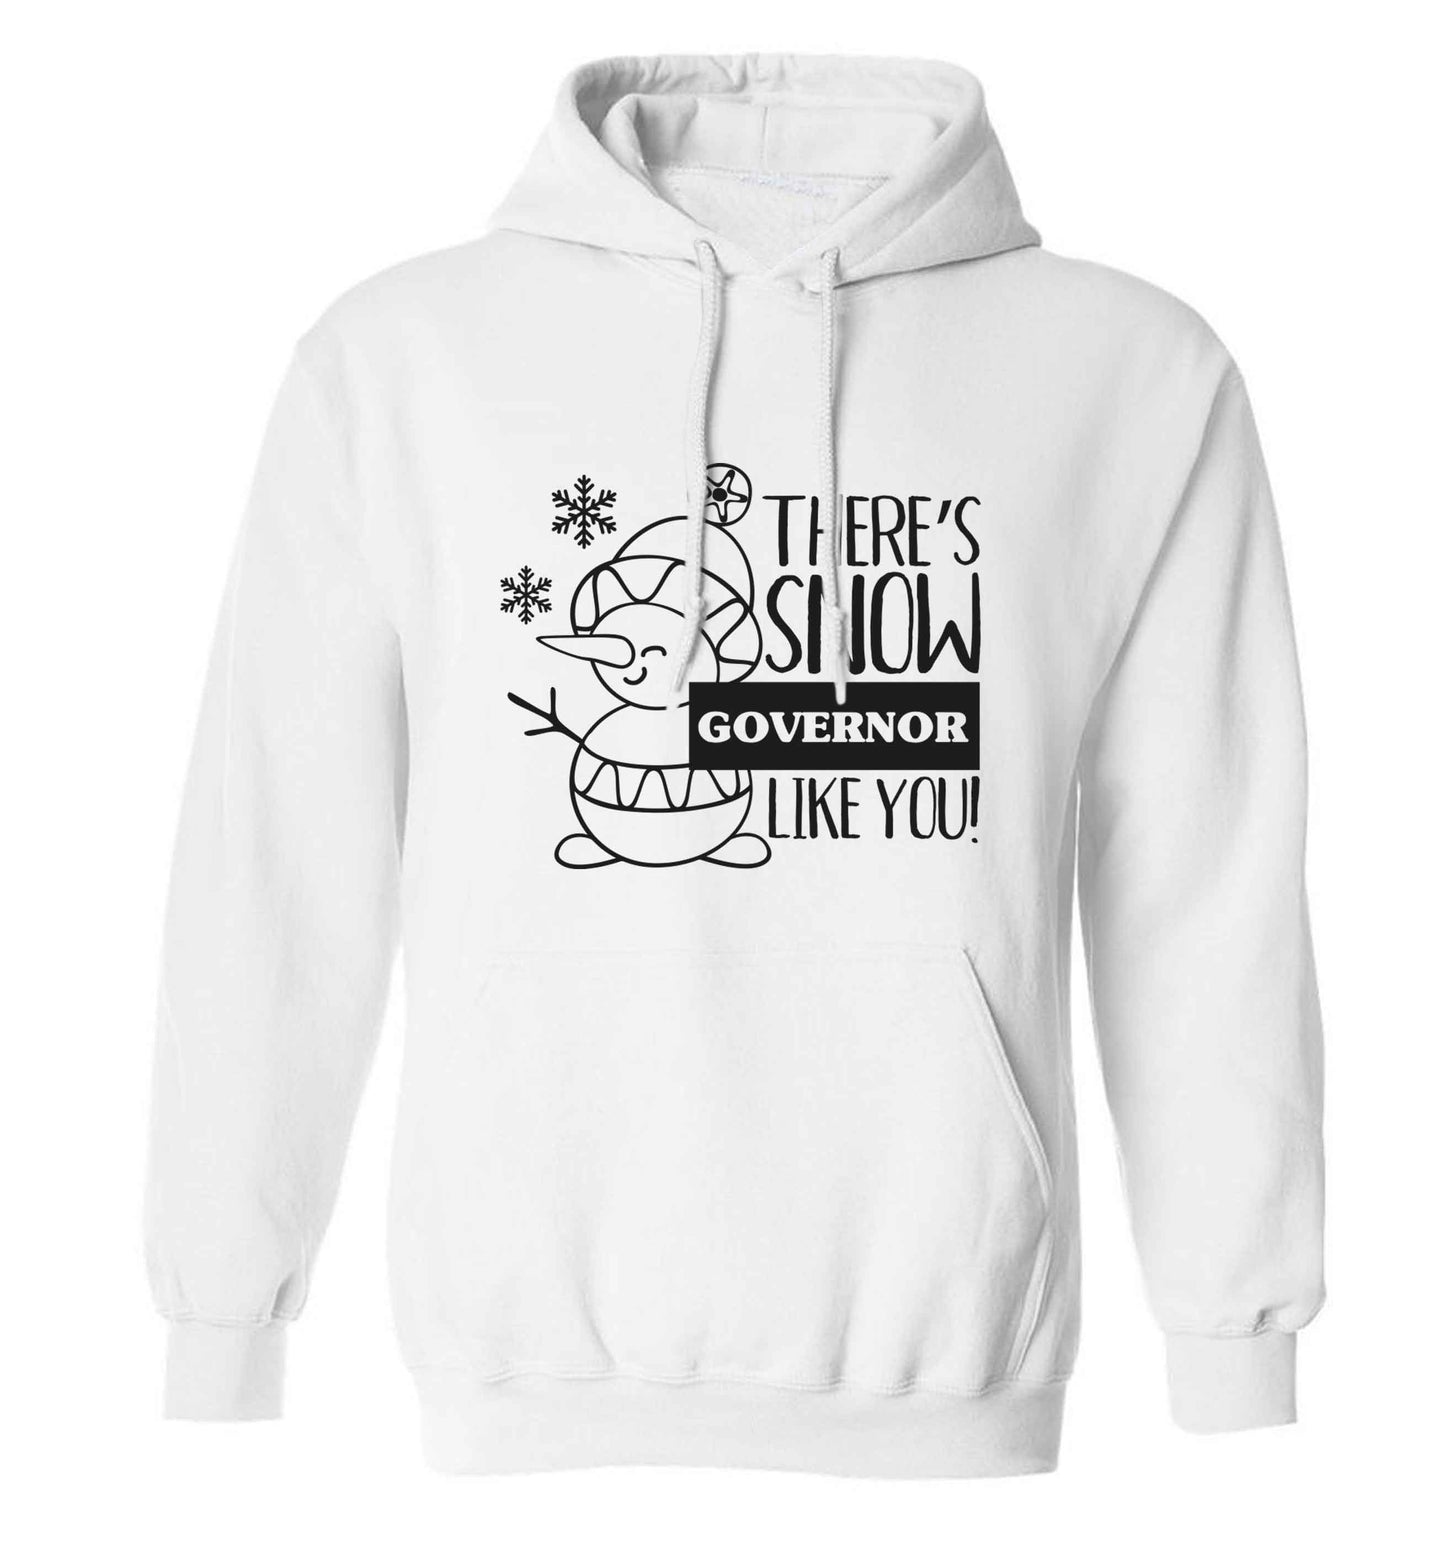 There's snow governor like you adults unisex white hoodie 2XL